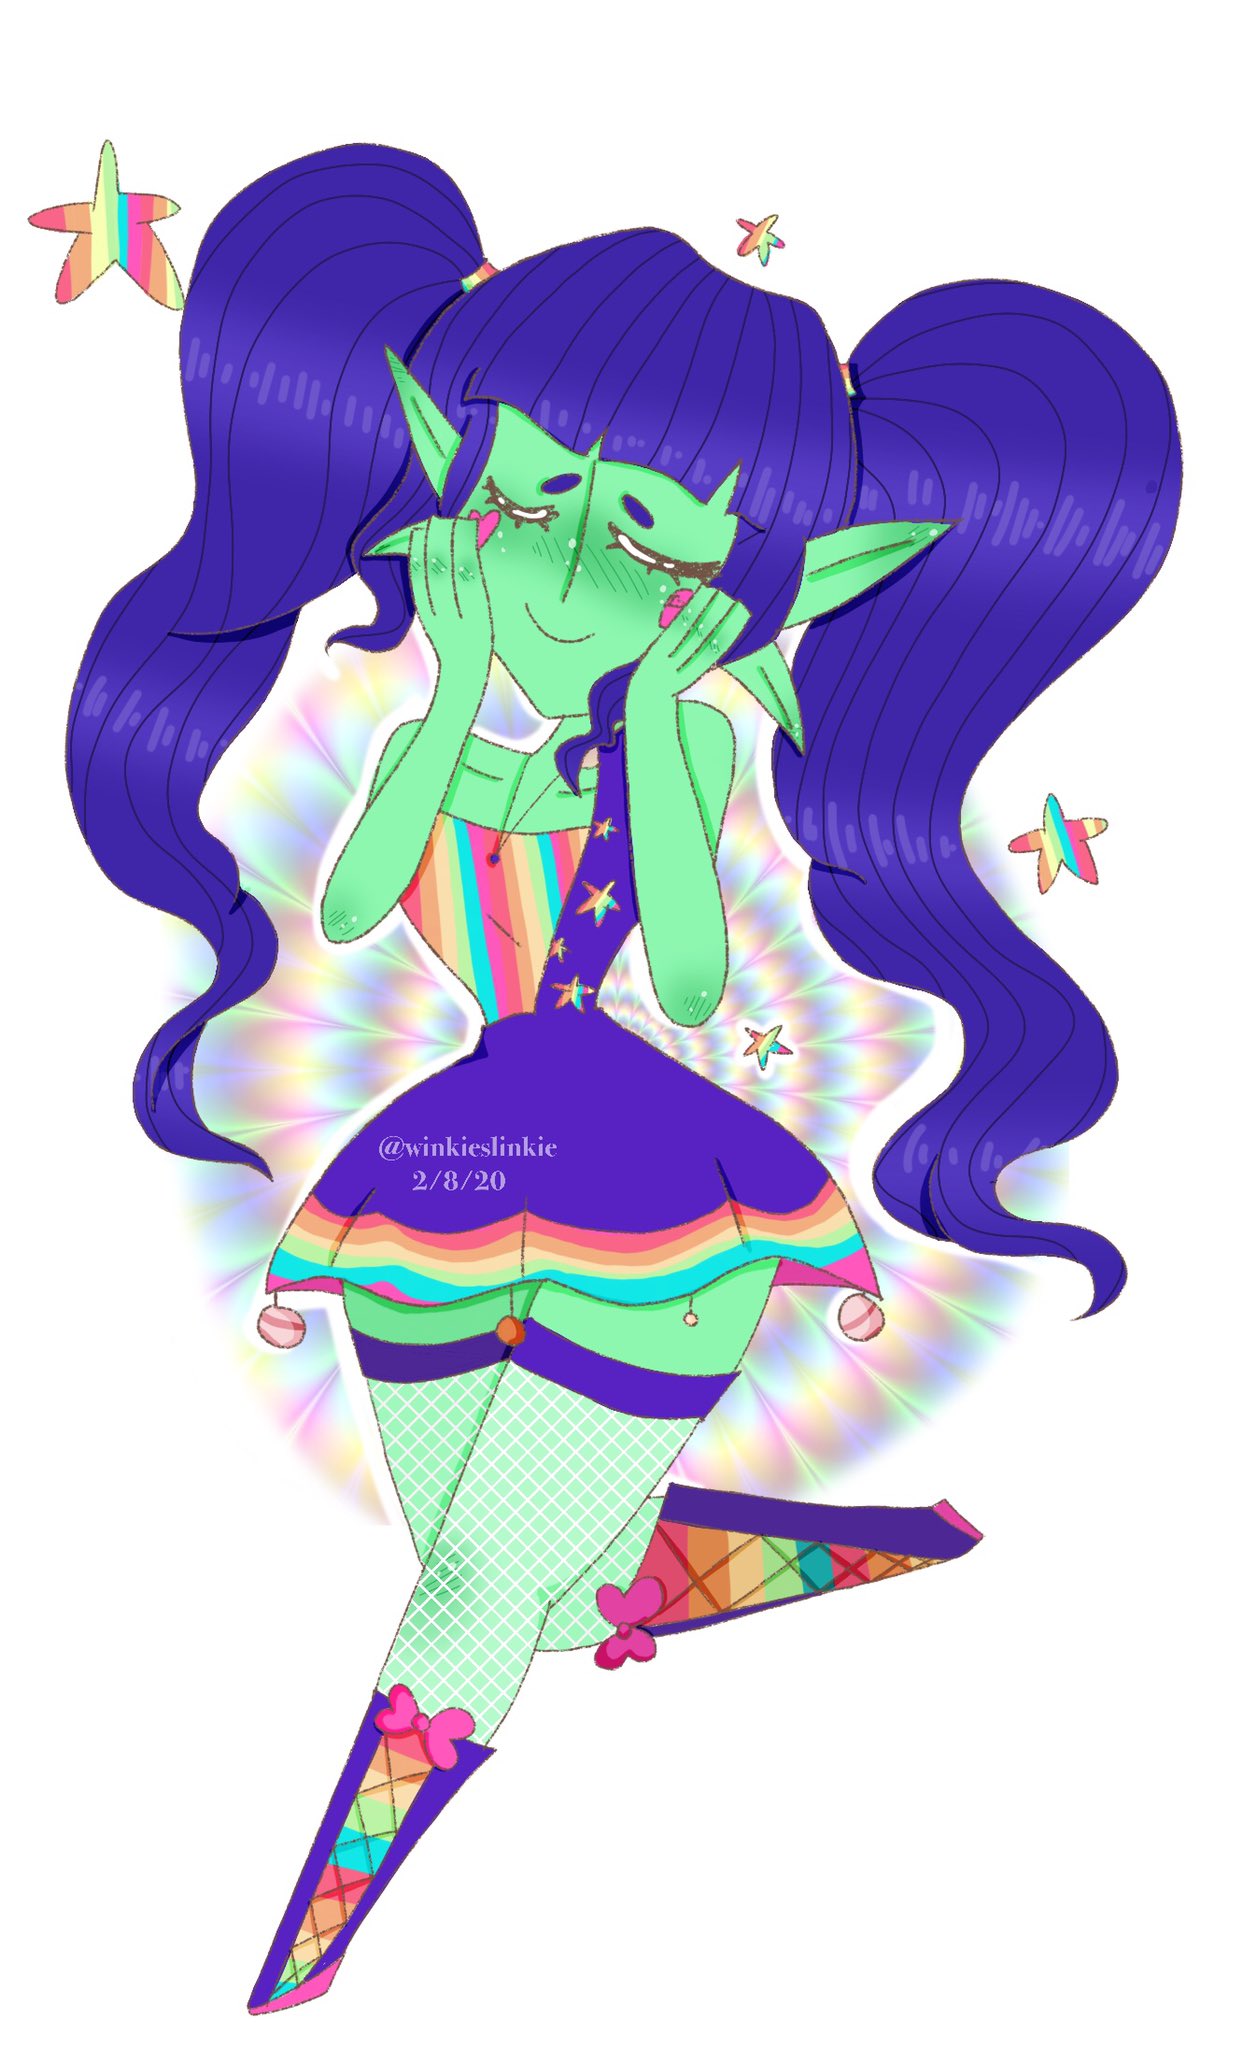 Slinkie On Twitter Ok So I Really Love The Outfit Cybernova Wore In Her Latest Video Probably One Of The Coolest Ugc Items I Ve Ever Seen I Love The Rainbows I M Out - roblox alien outfit